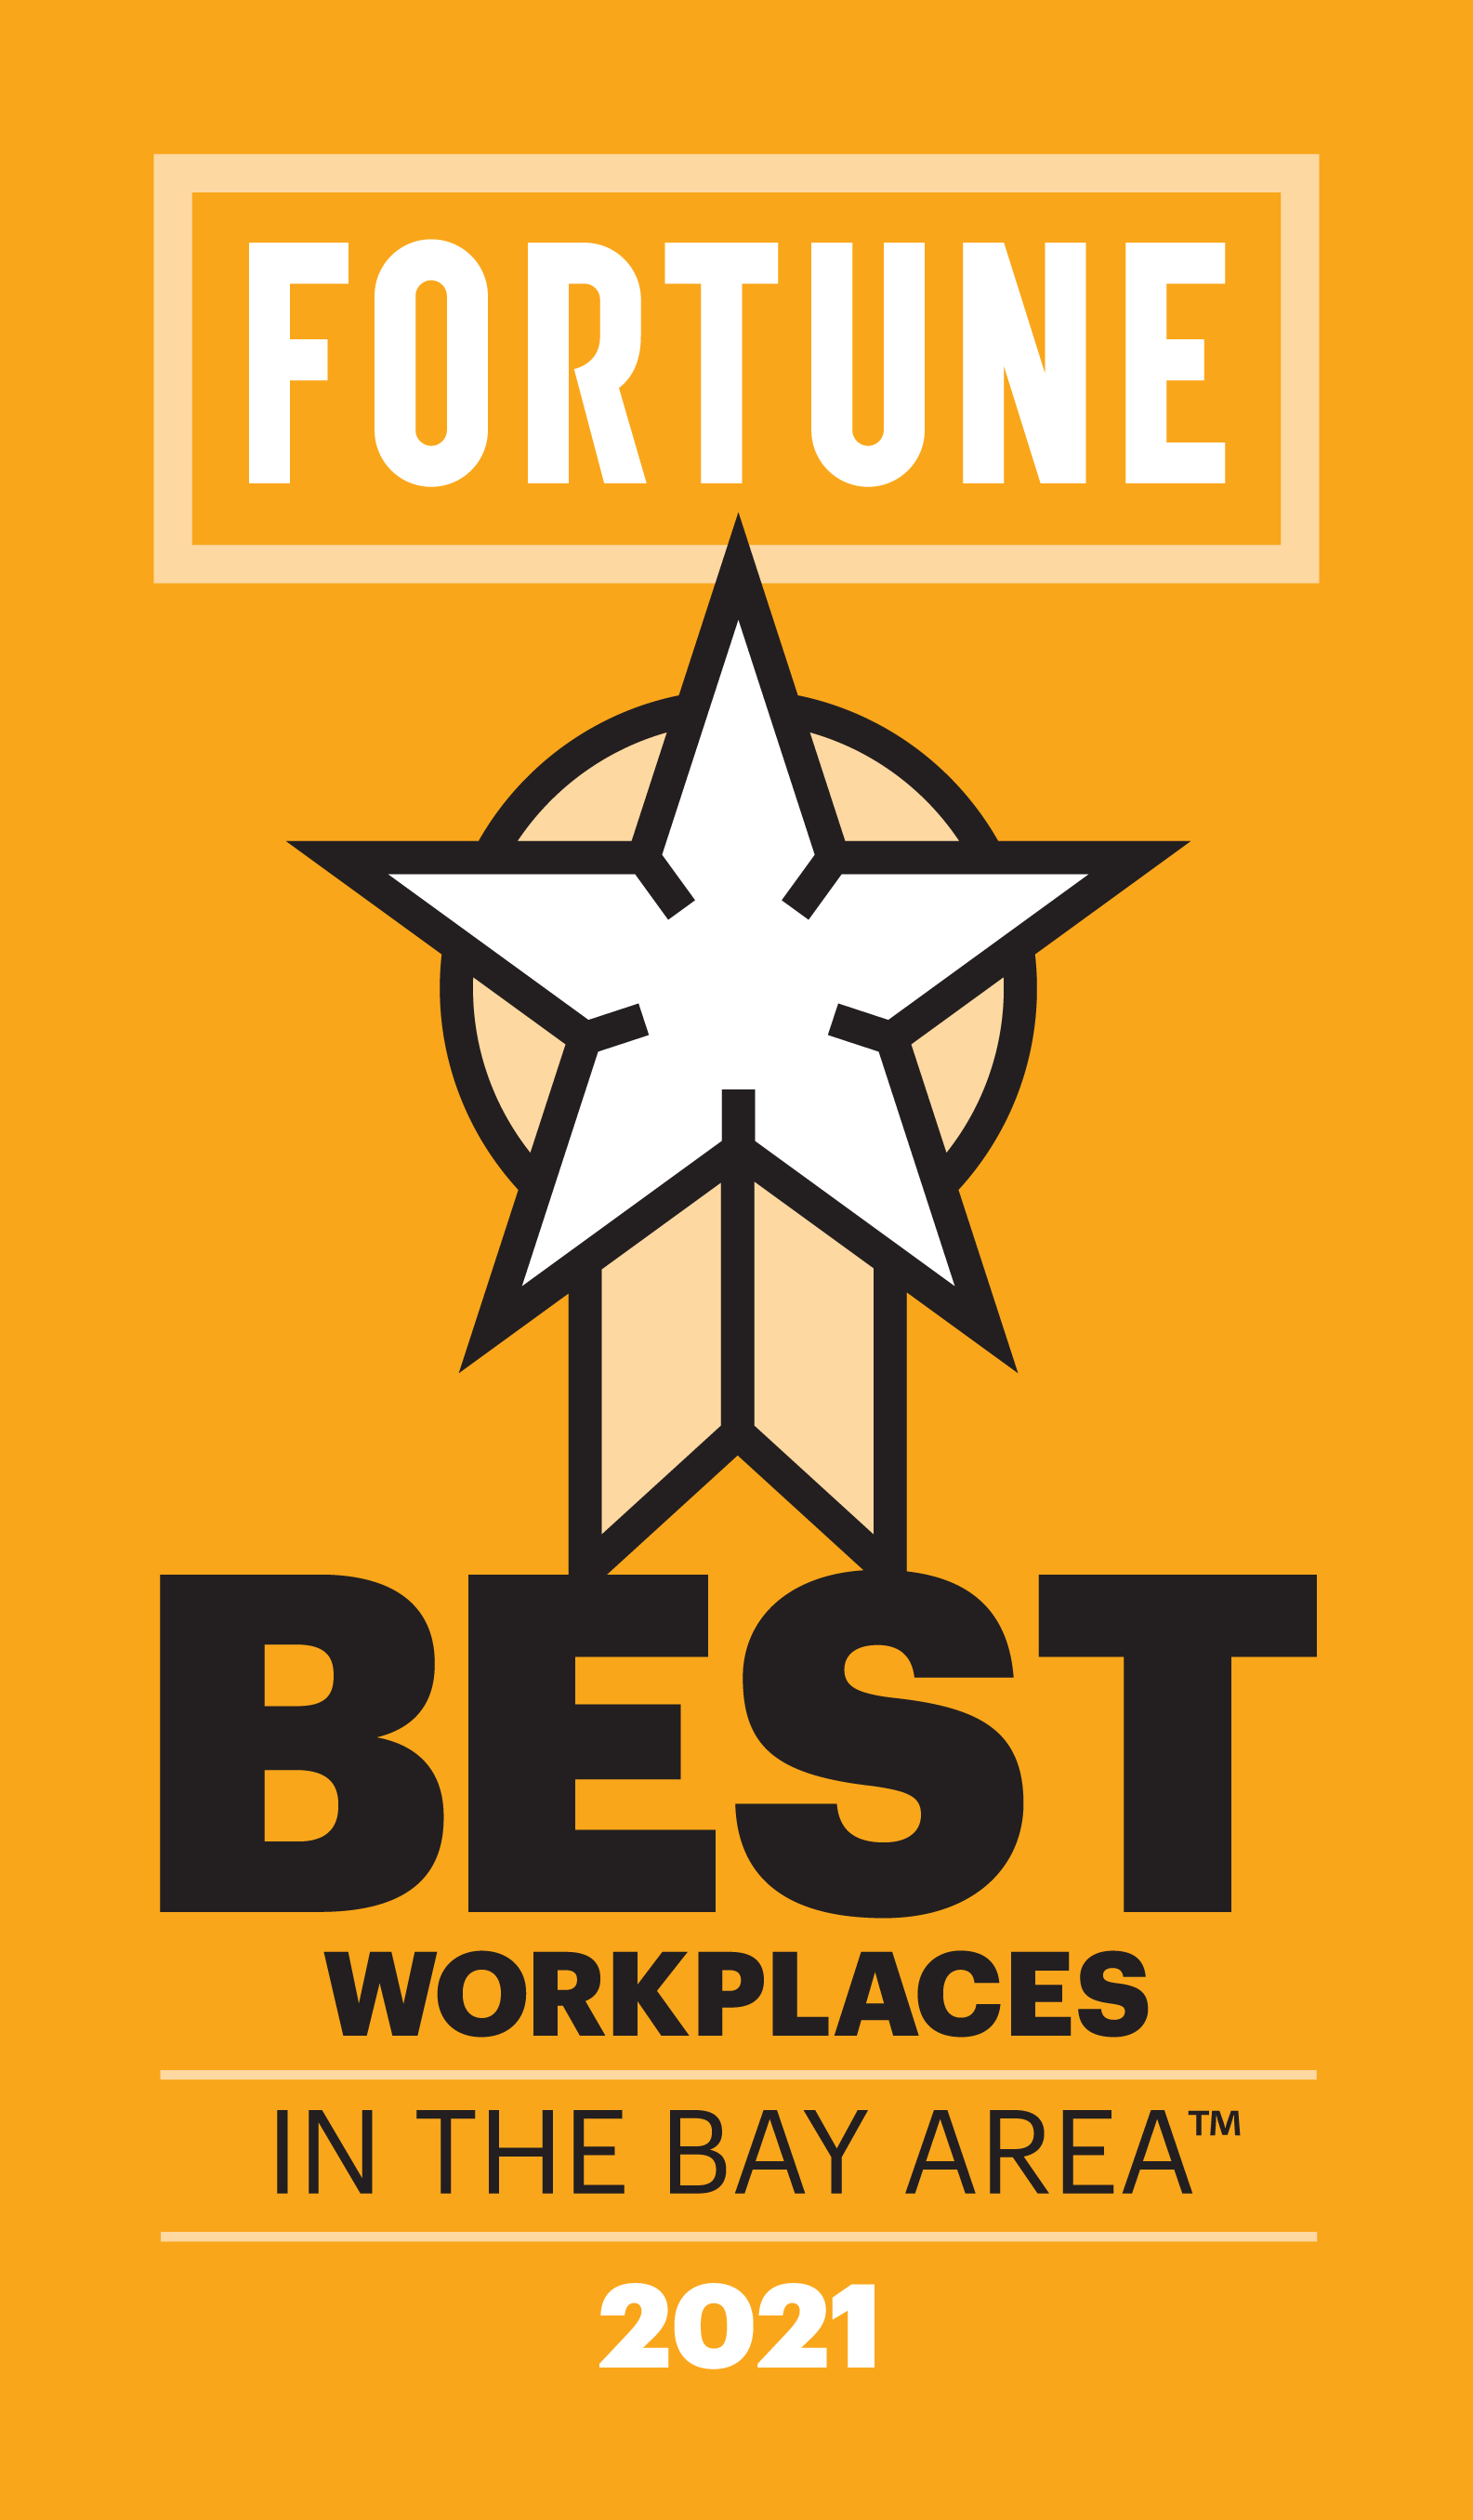 Fortune Best Workplaces 2021